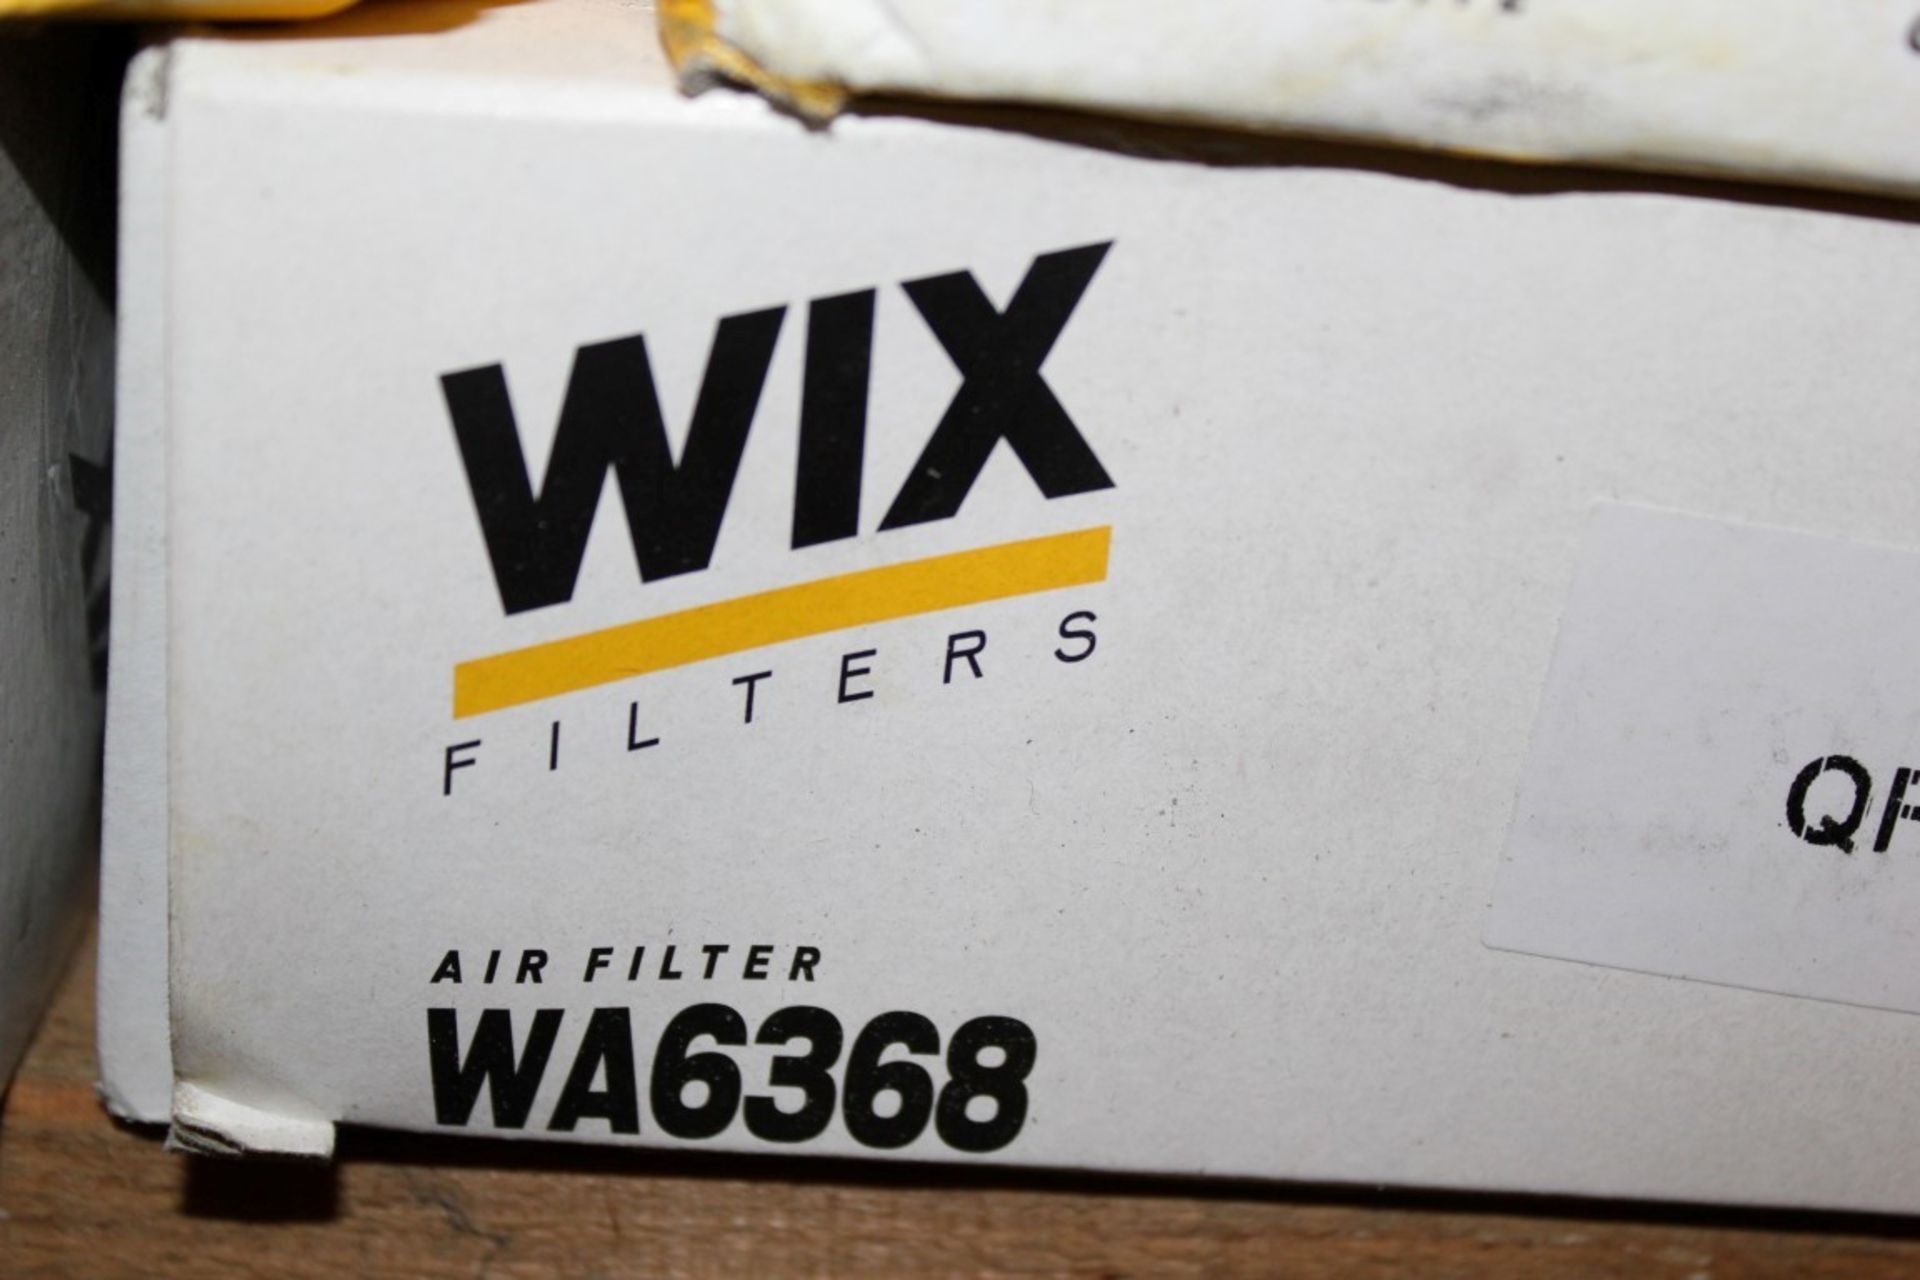 Approx 200 x Assorted "Wix" Car Air & Oil Filters – New / Unused Boxed Stock – Wix102 – CL045 – - Image 6 of 11